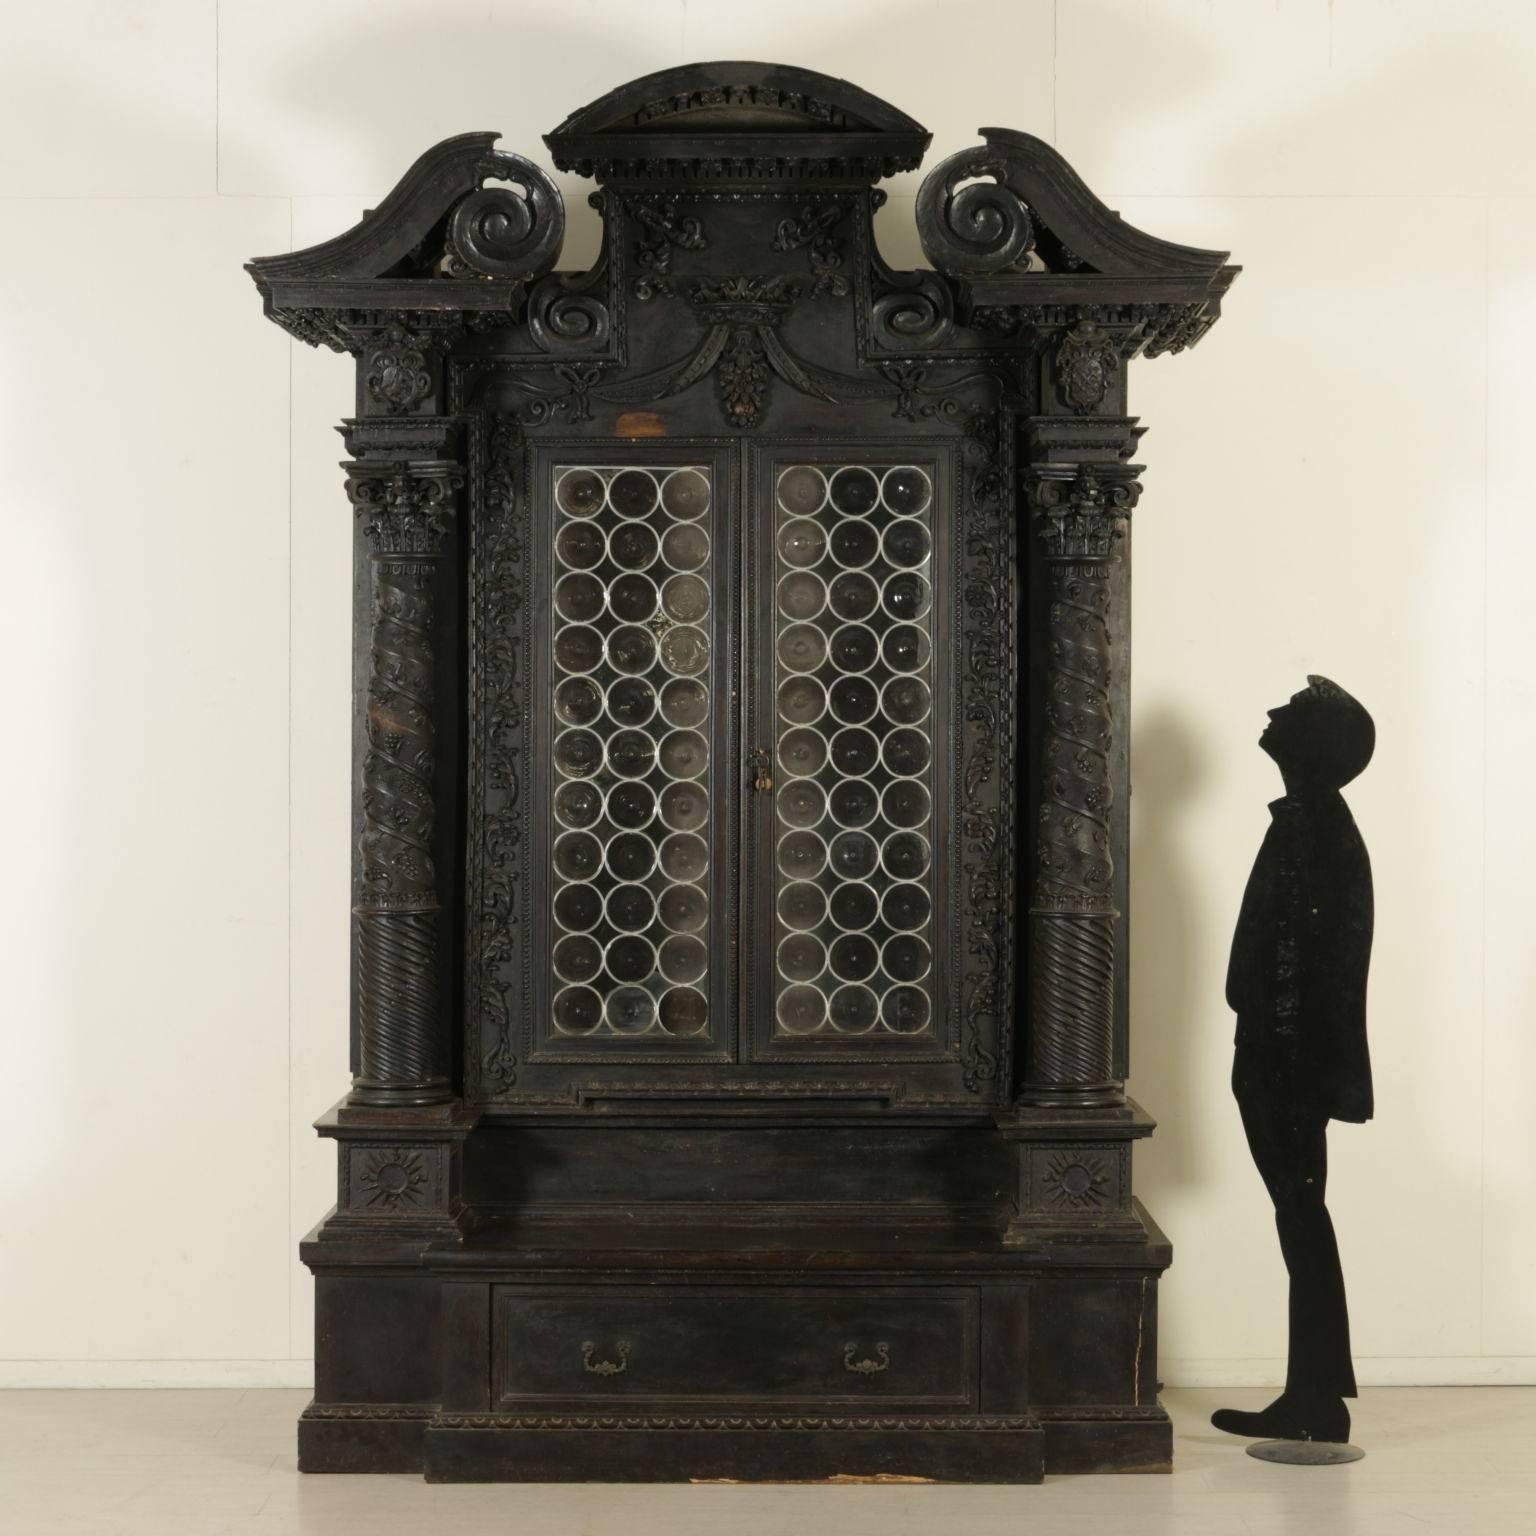 An important Renaissance Revival two-door walnut veneered bookcase with artistic glasses. It features a pair of towers with Corinthian capitals ending in a tripartite tympanum. Richly carved with floral and vegetal patterns and a crown with drapery.